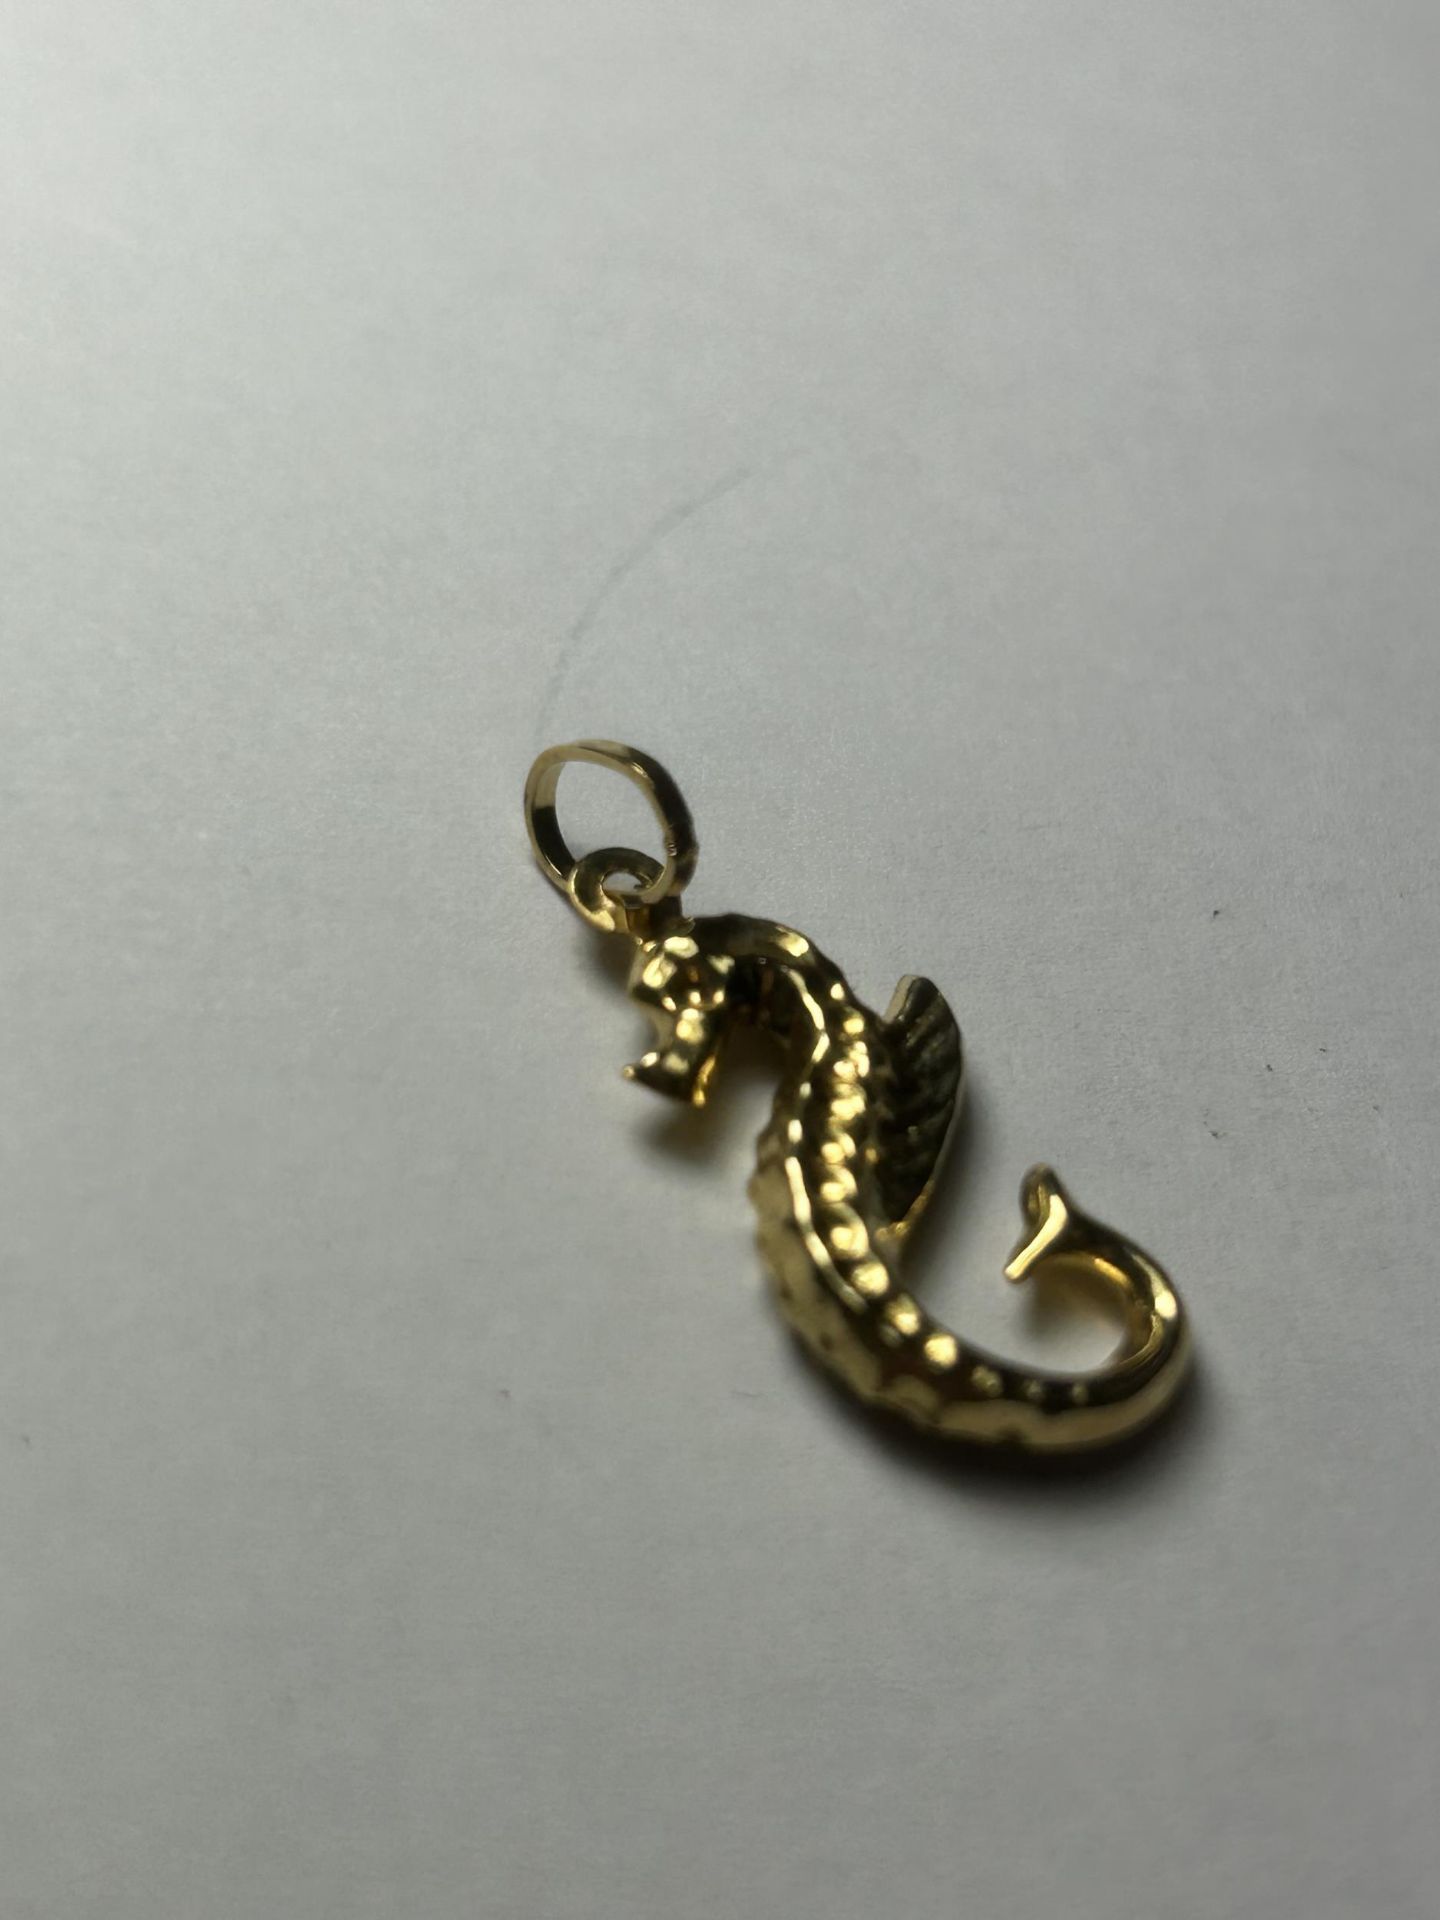 A 9CT YELLOW GOLD SEAHORSE CHARM - Image 2 of 3